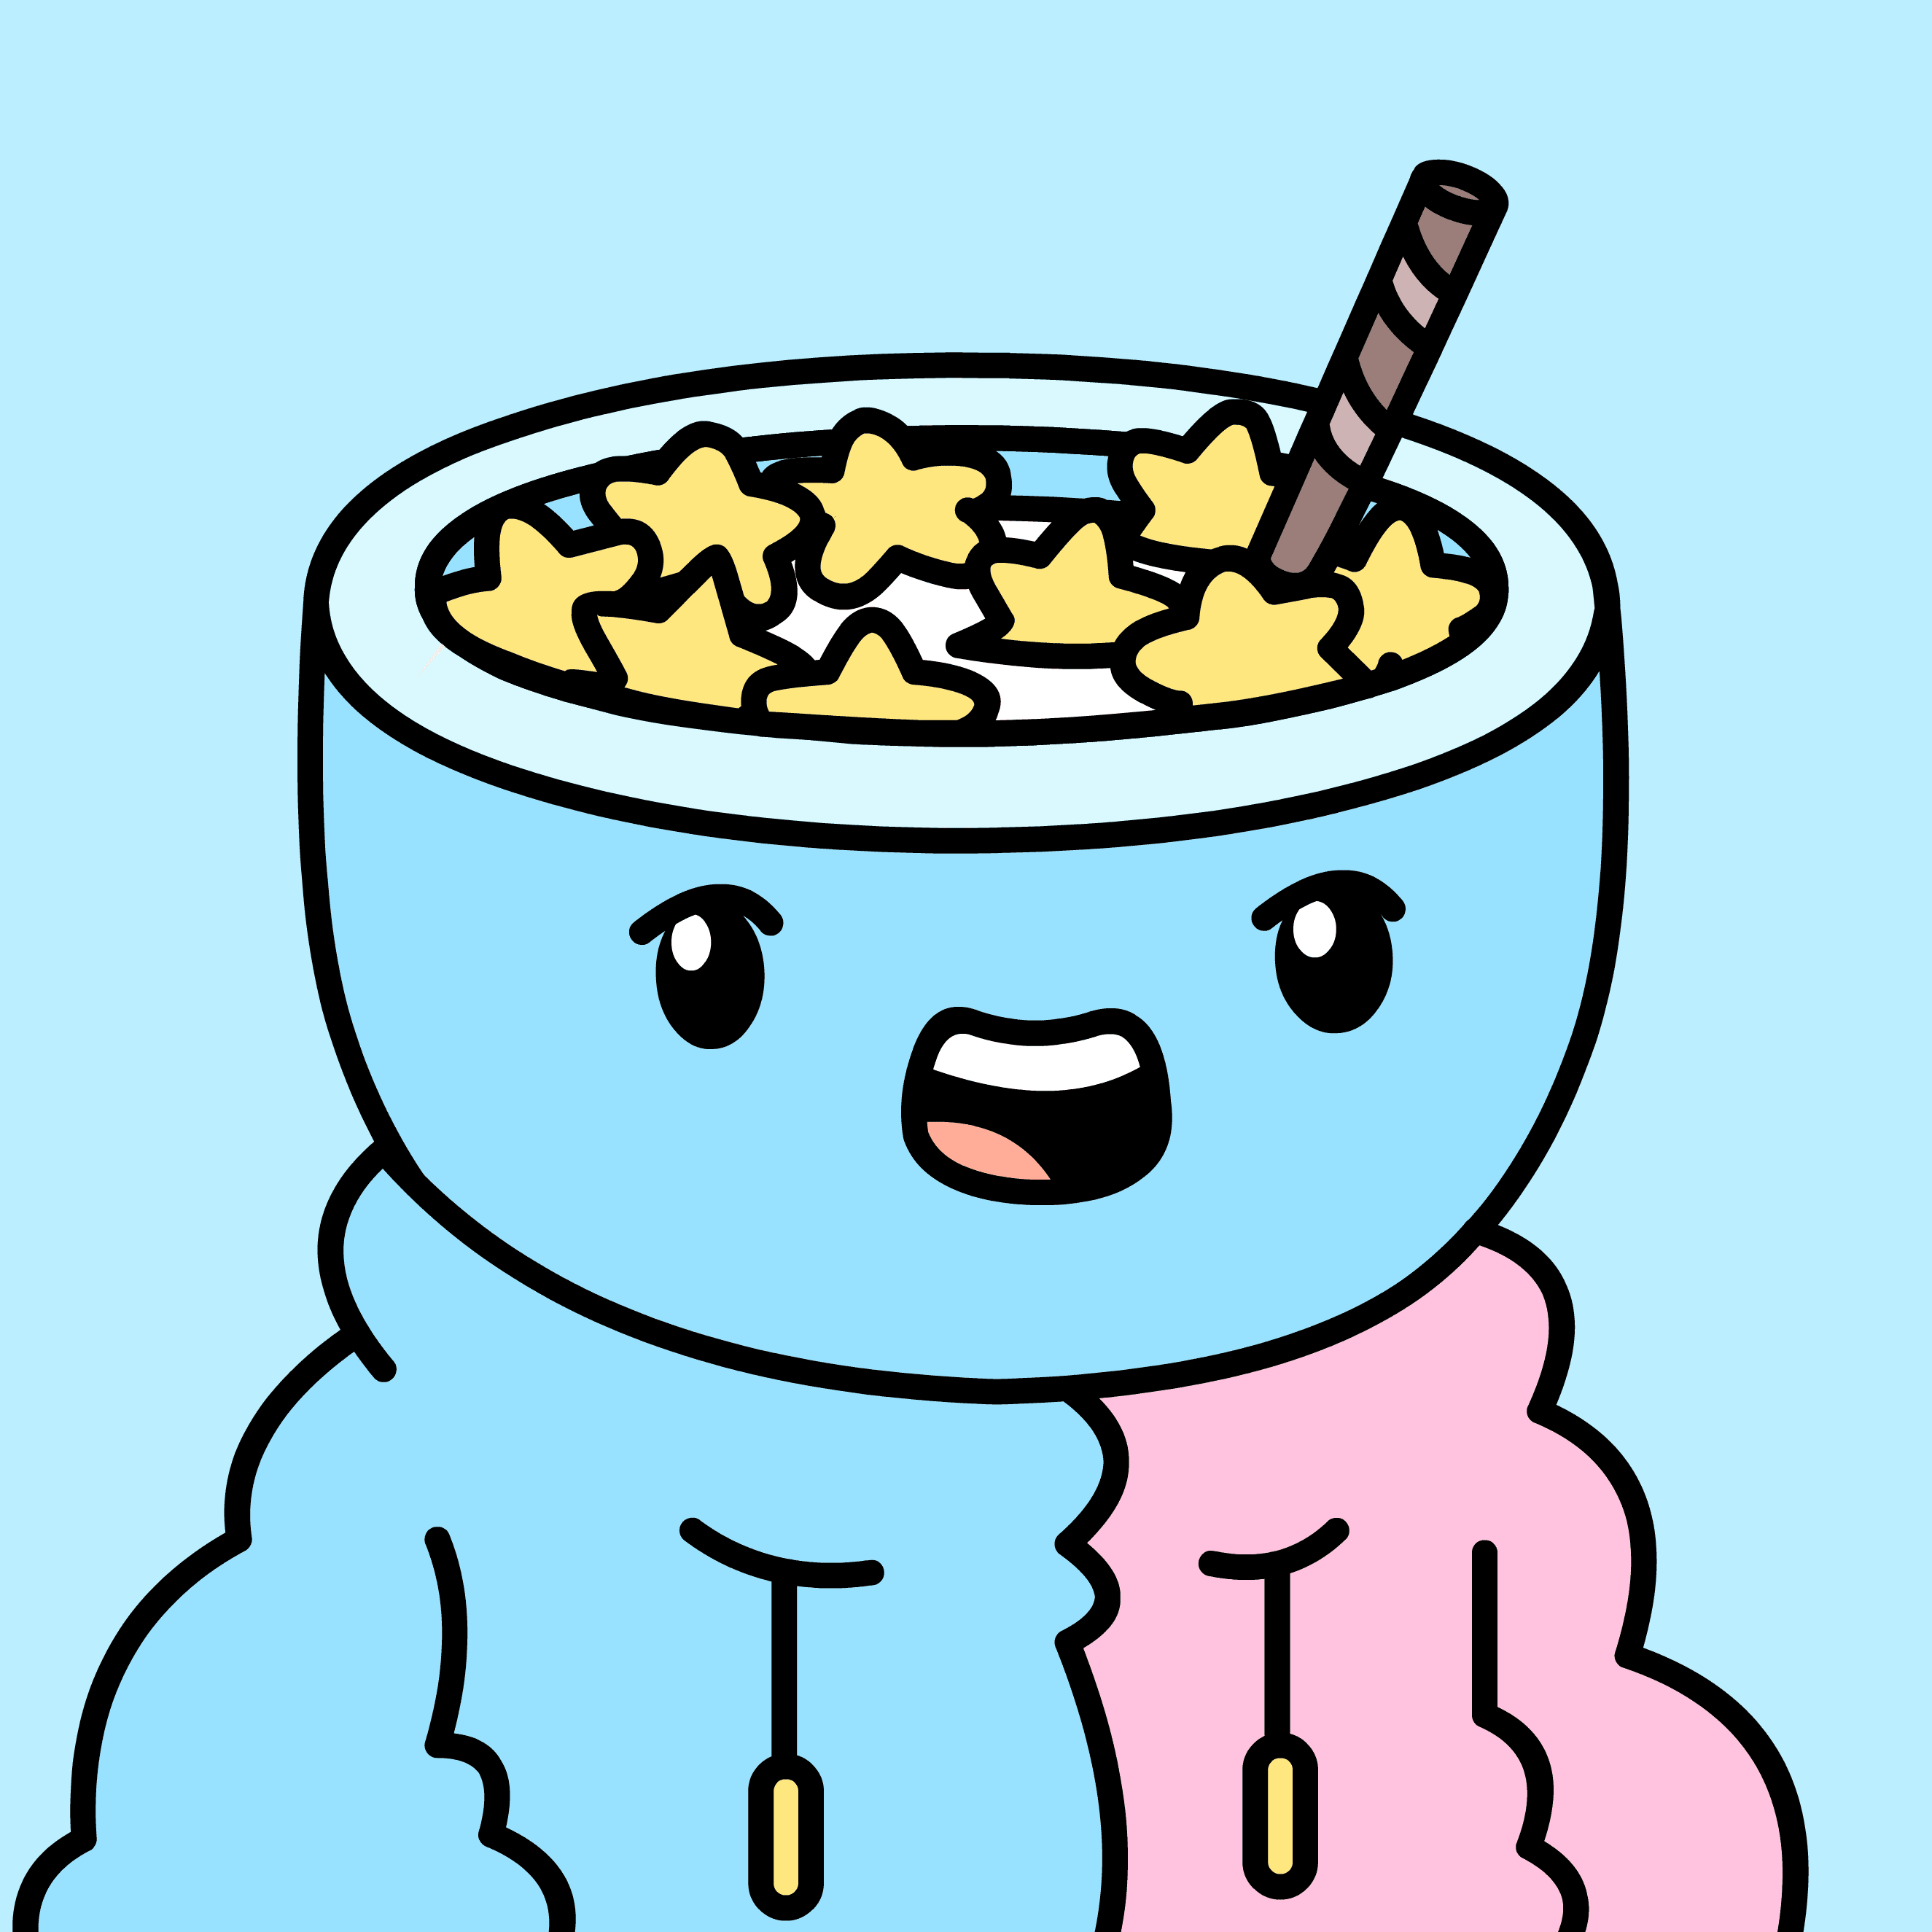 CEREAL #8743